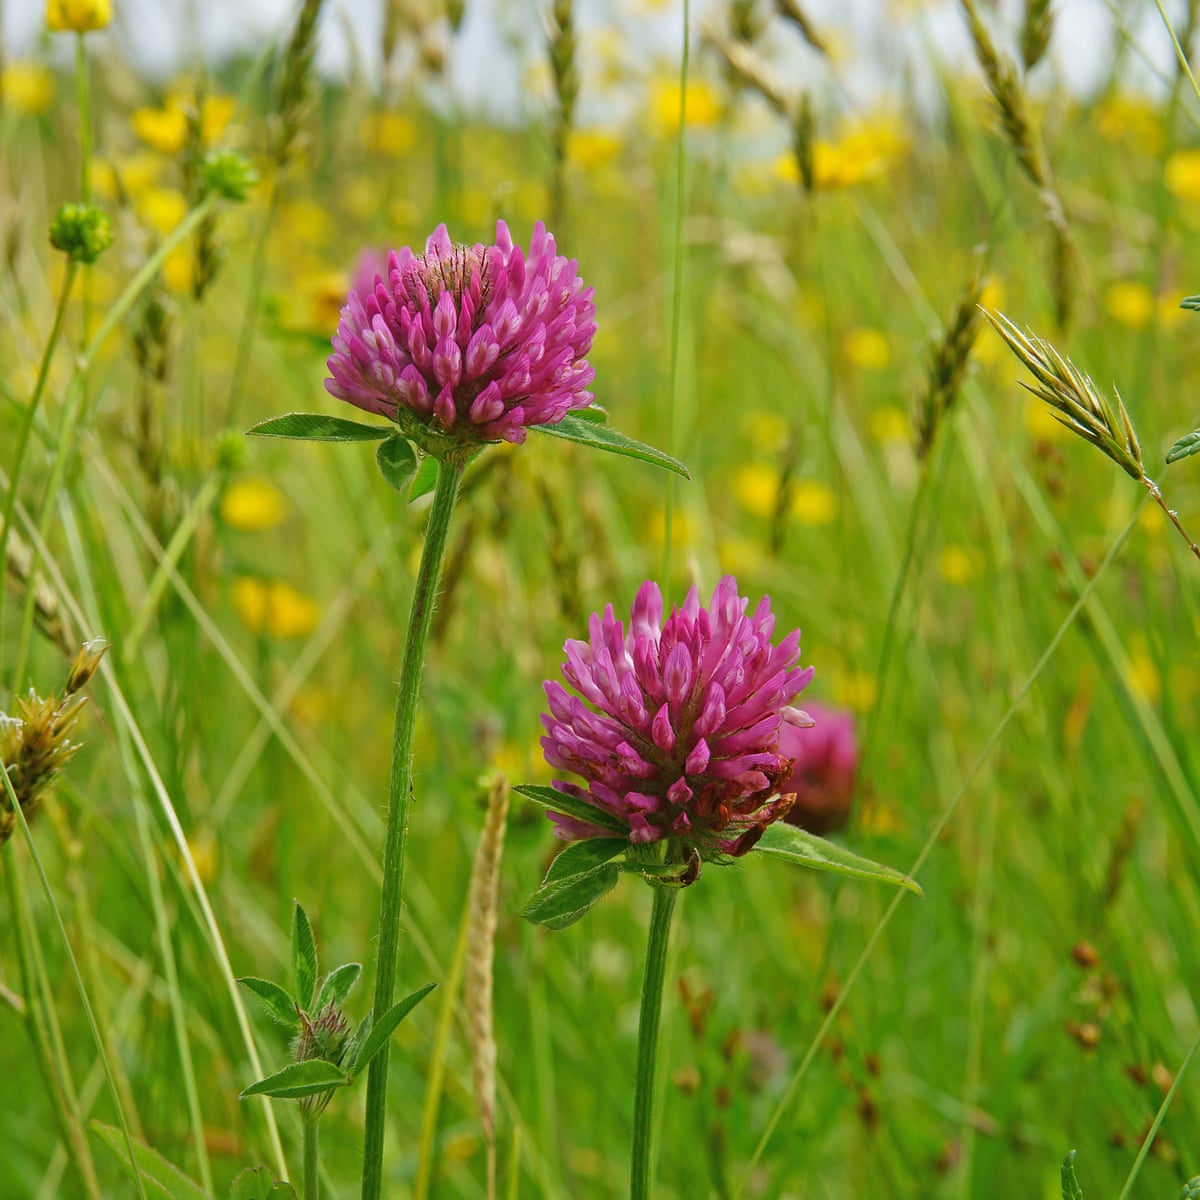 How to grow native red clover   Gardening advice   The Guardian